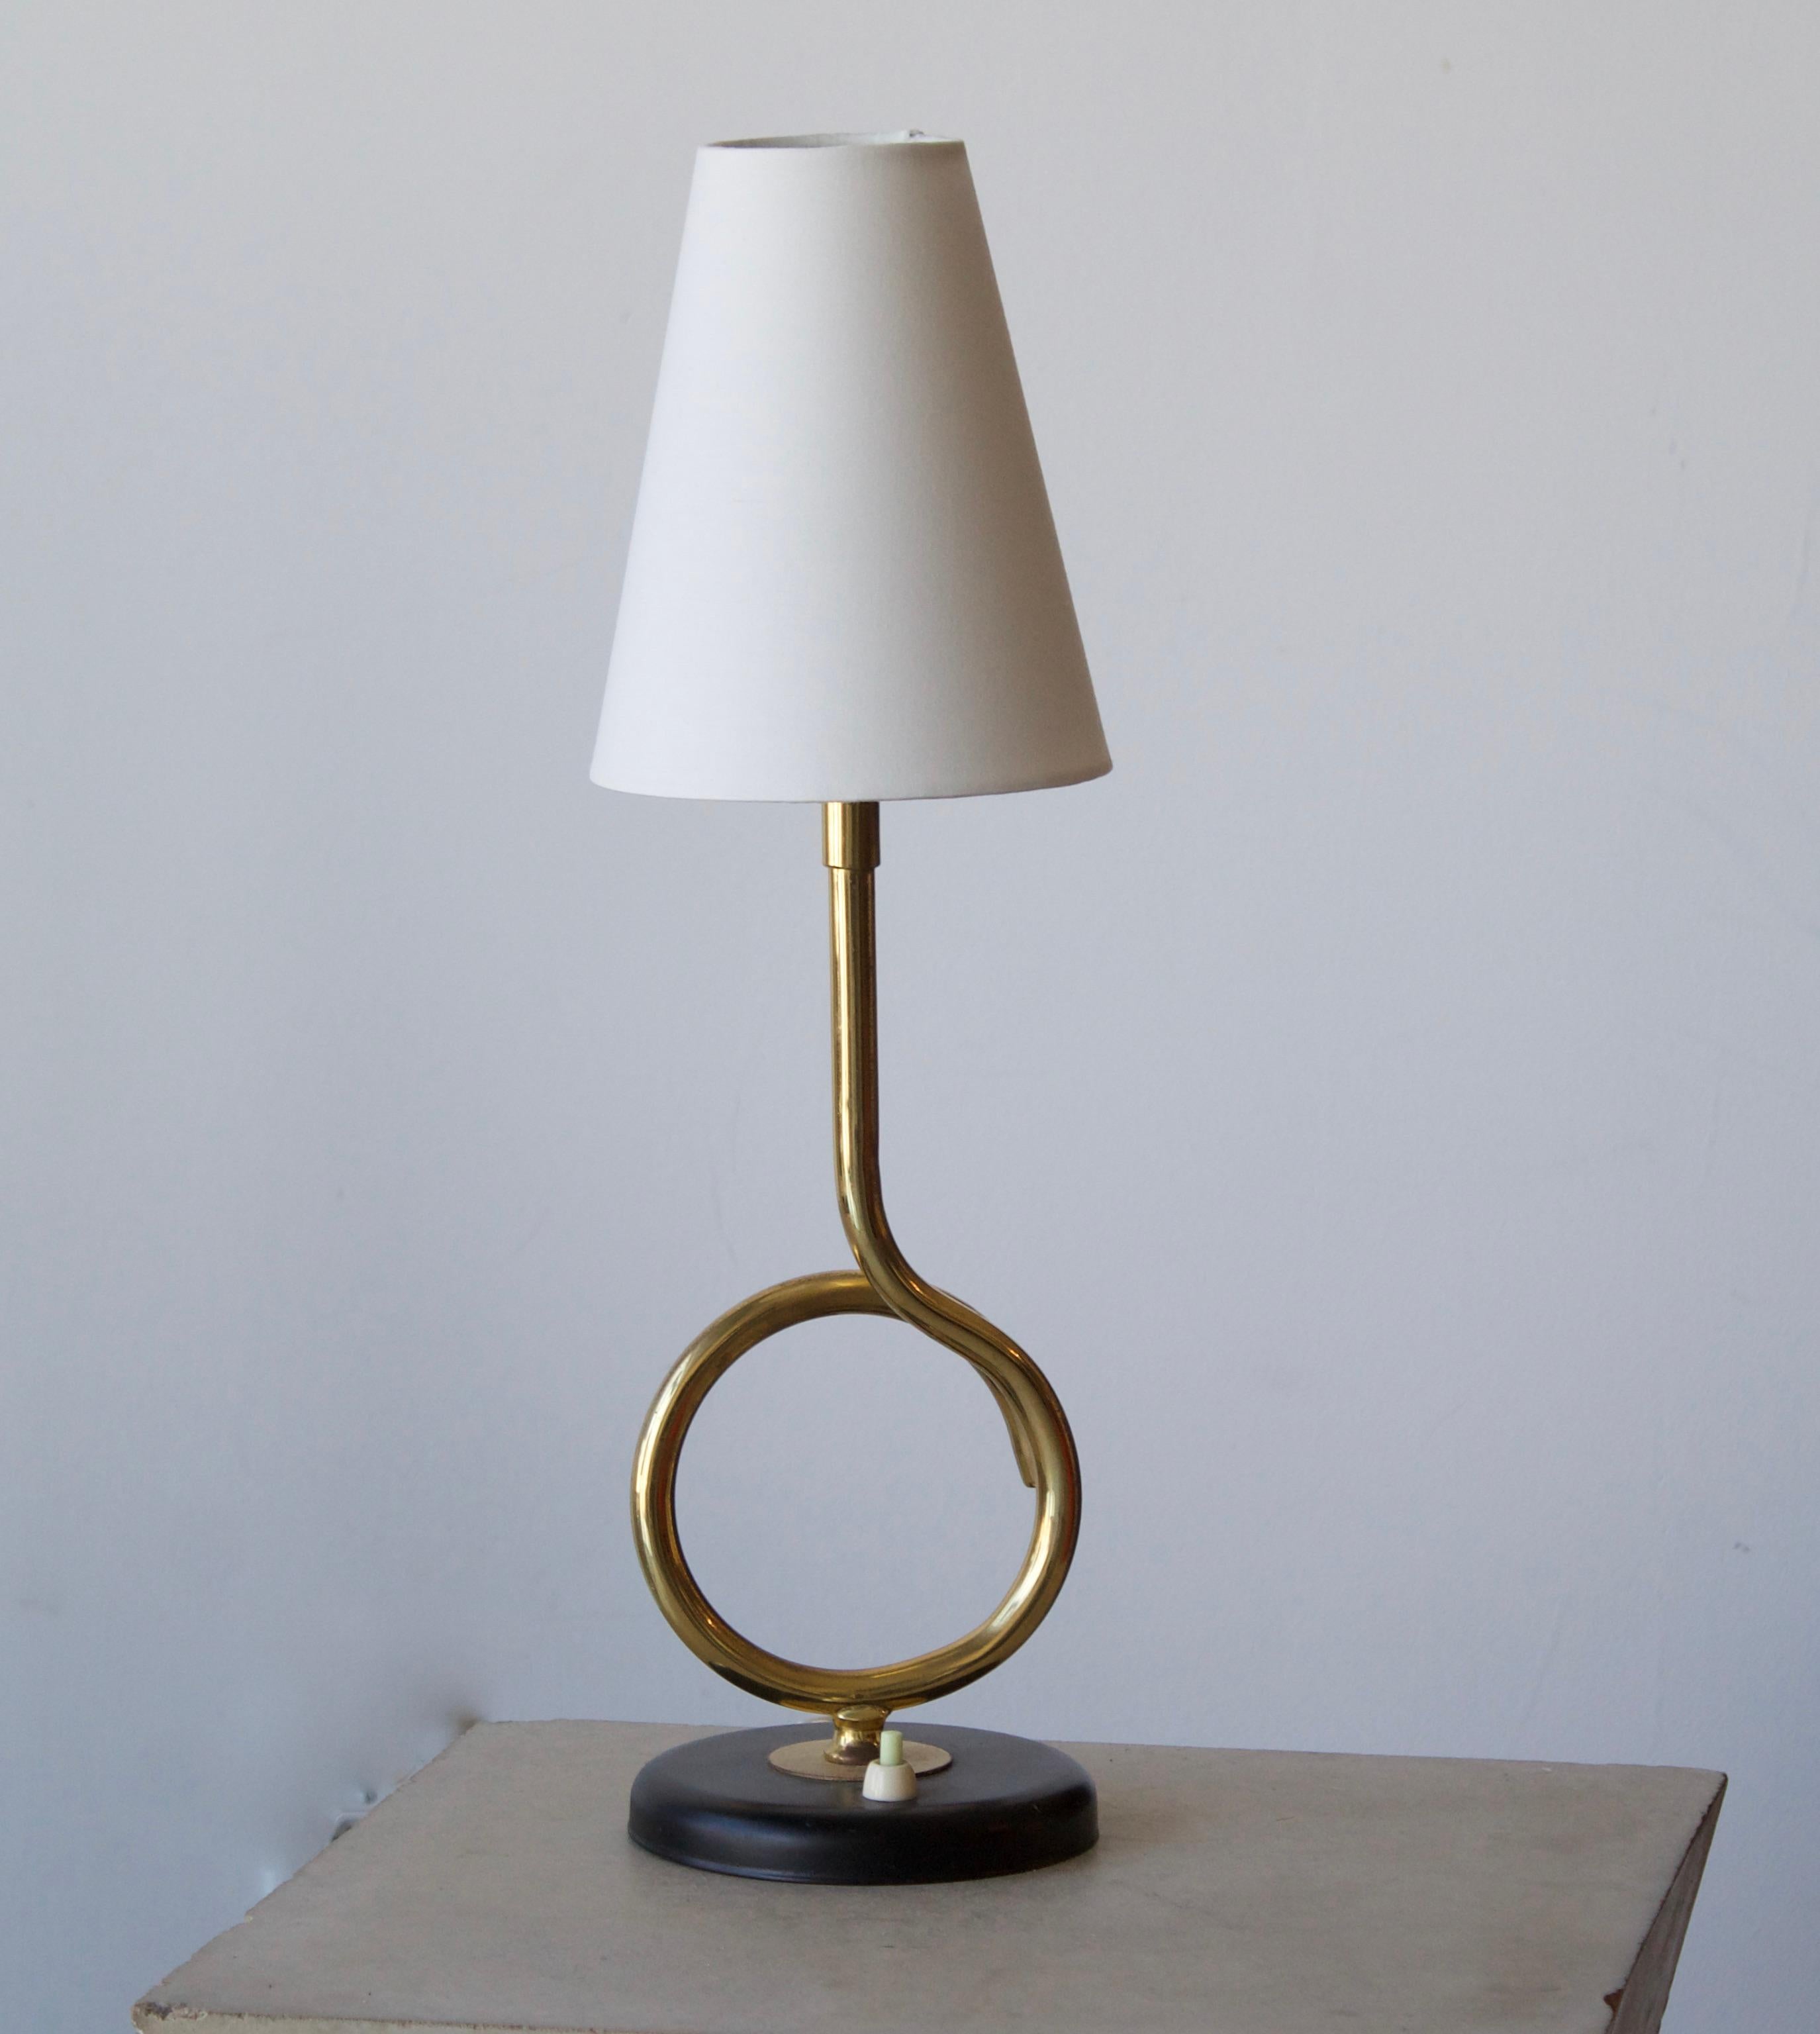 A table lamp by Valinte Oy. In brass, lacquered metal, brass, brand new lampshade. Stamped

Other designers of the period include Josef Frank, Paavo Tynell, Hans Bergström, Böhlmarks, and Jean Royère.